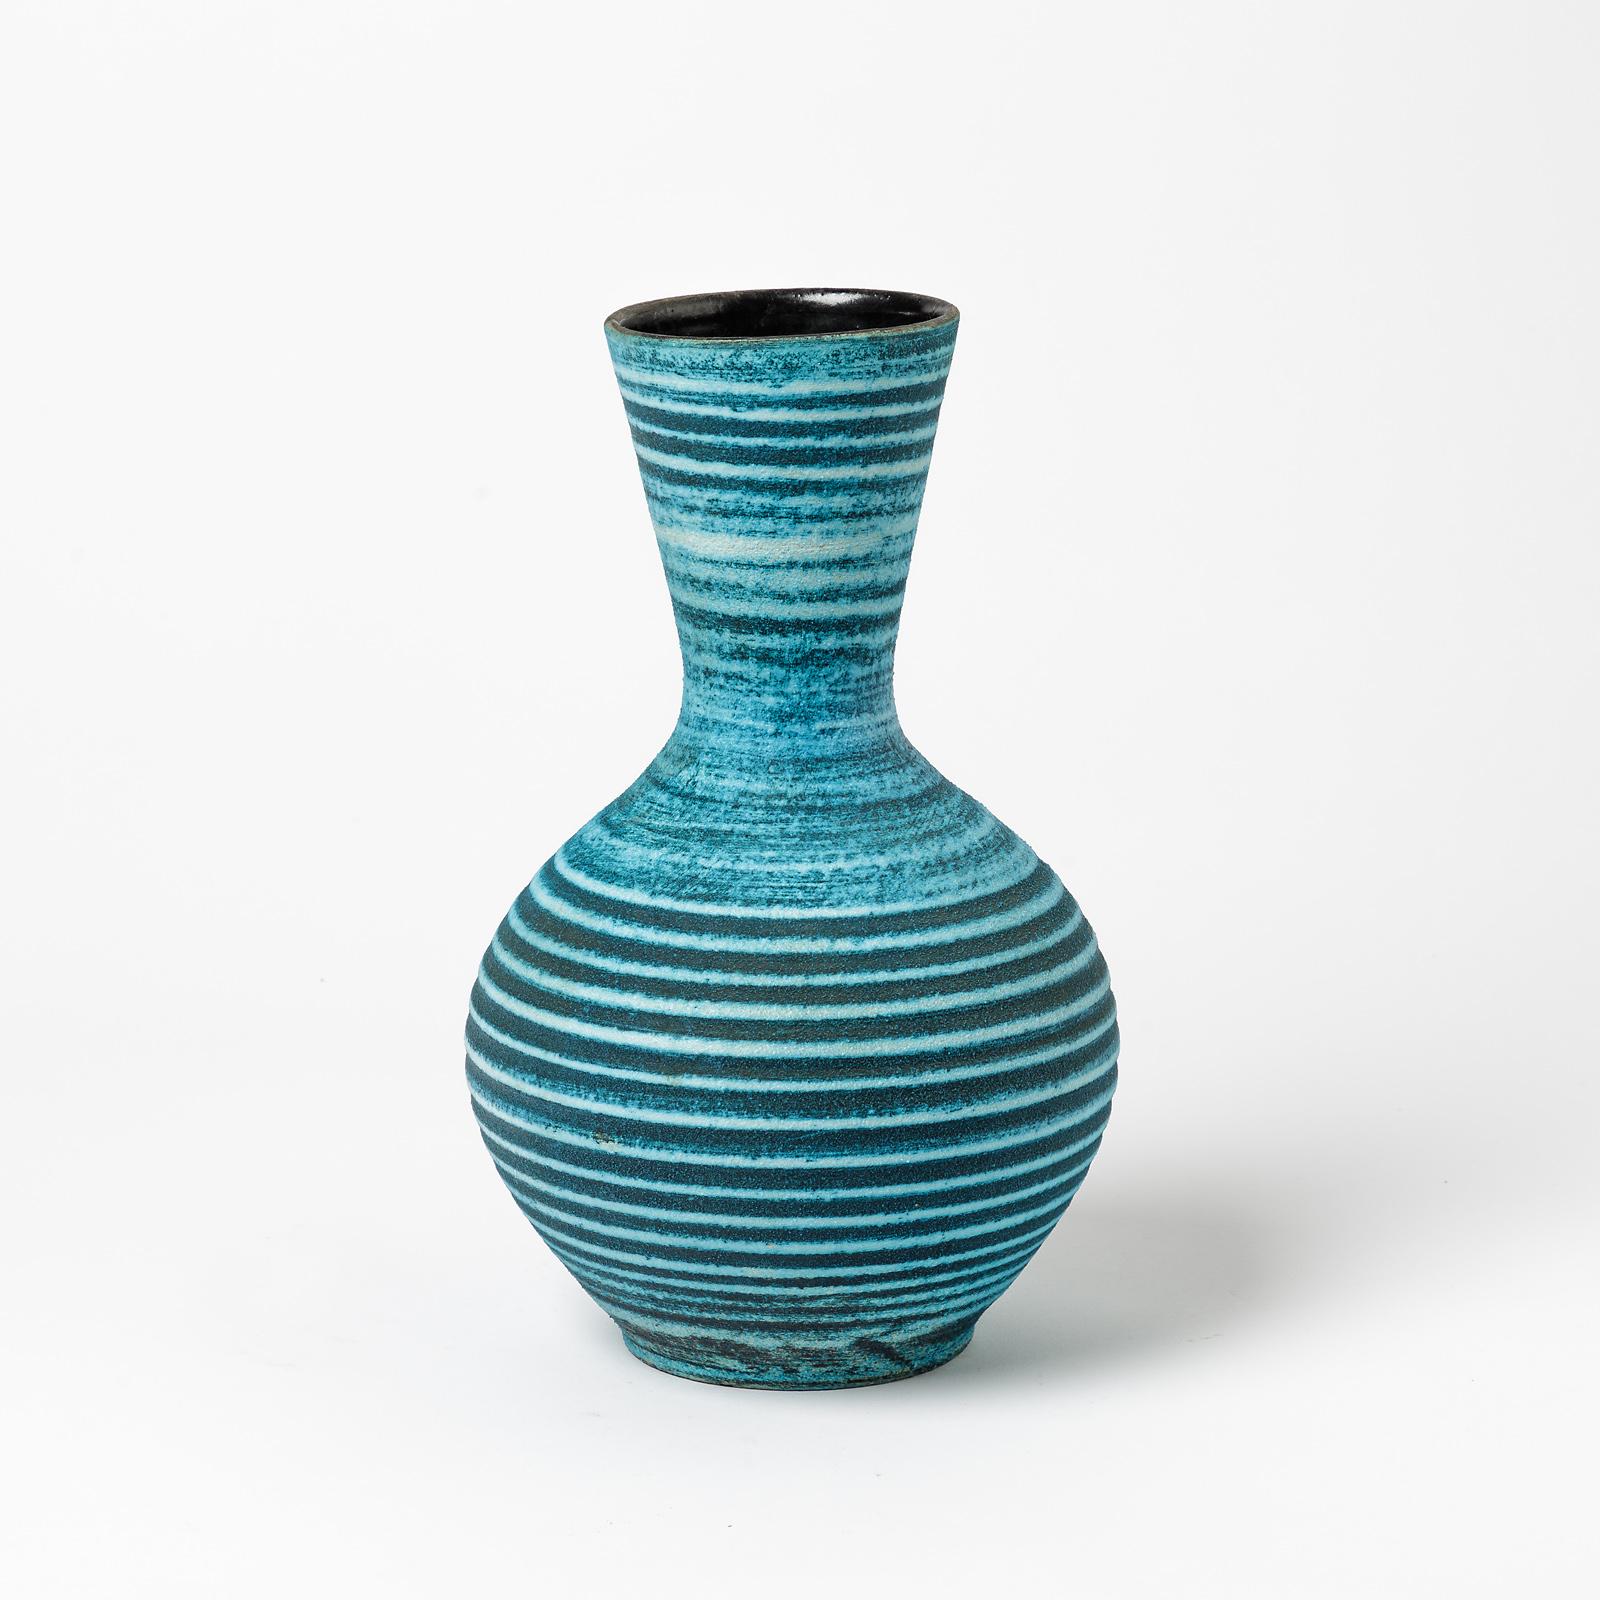 Beaux Arts Ceramic Vase with Blue Glaze Decoration by Accolay, circa 1960-1970